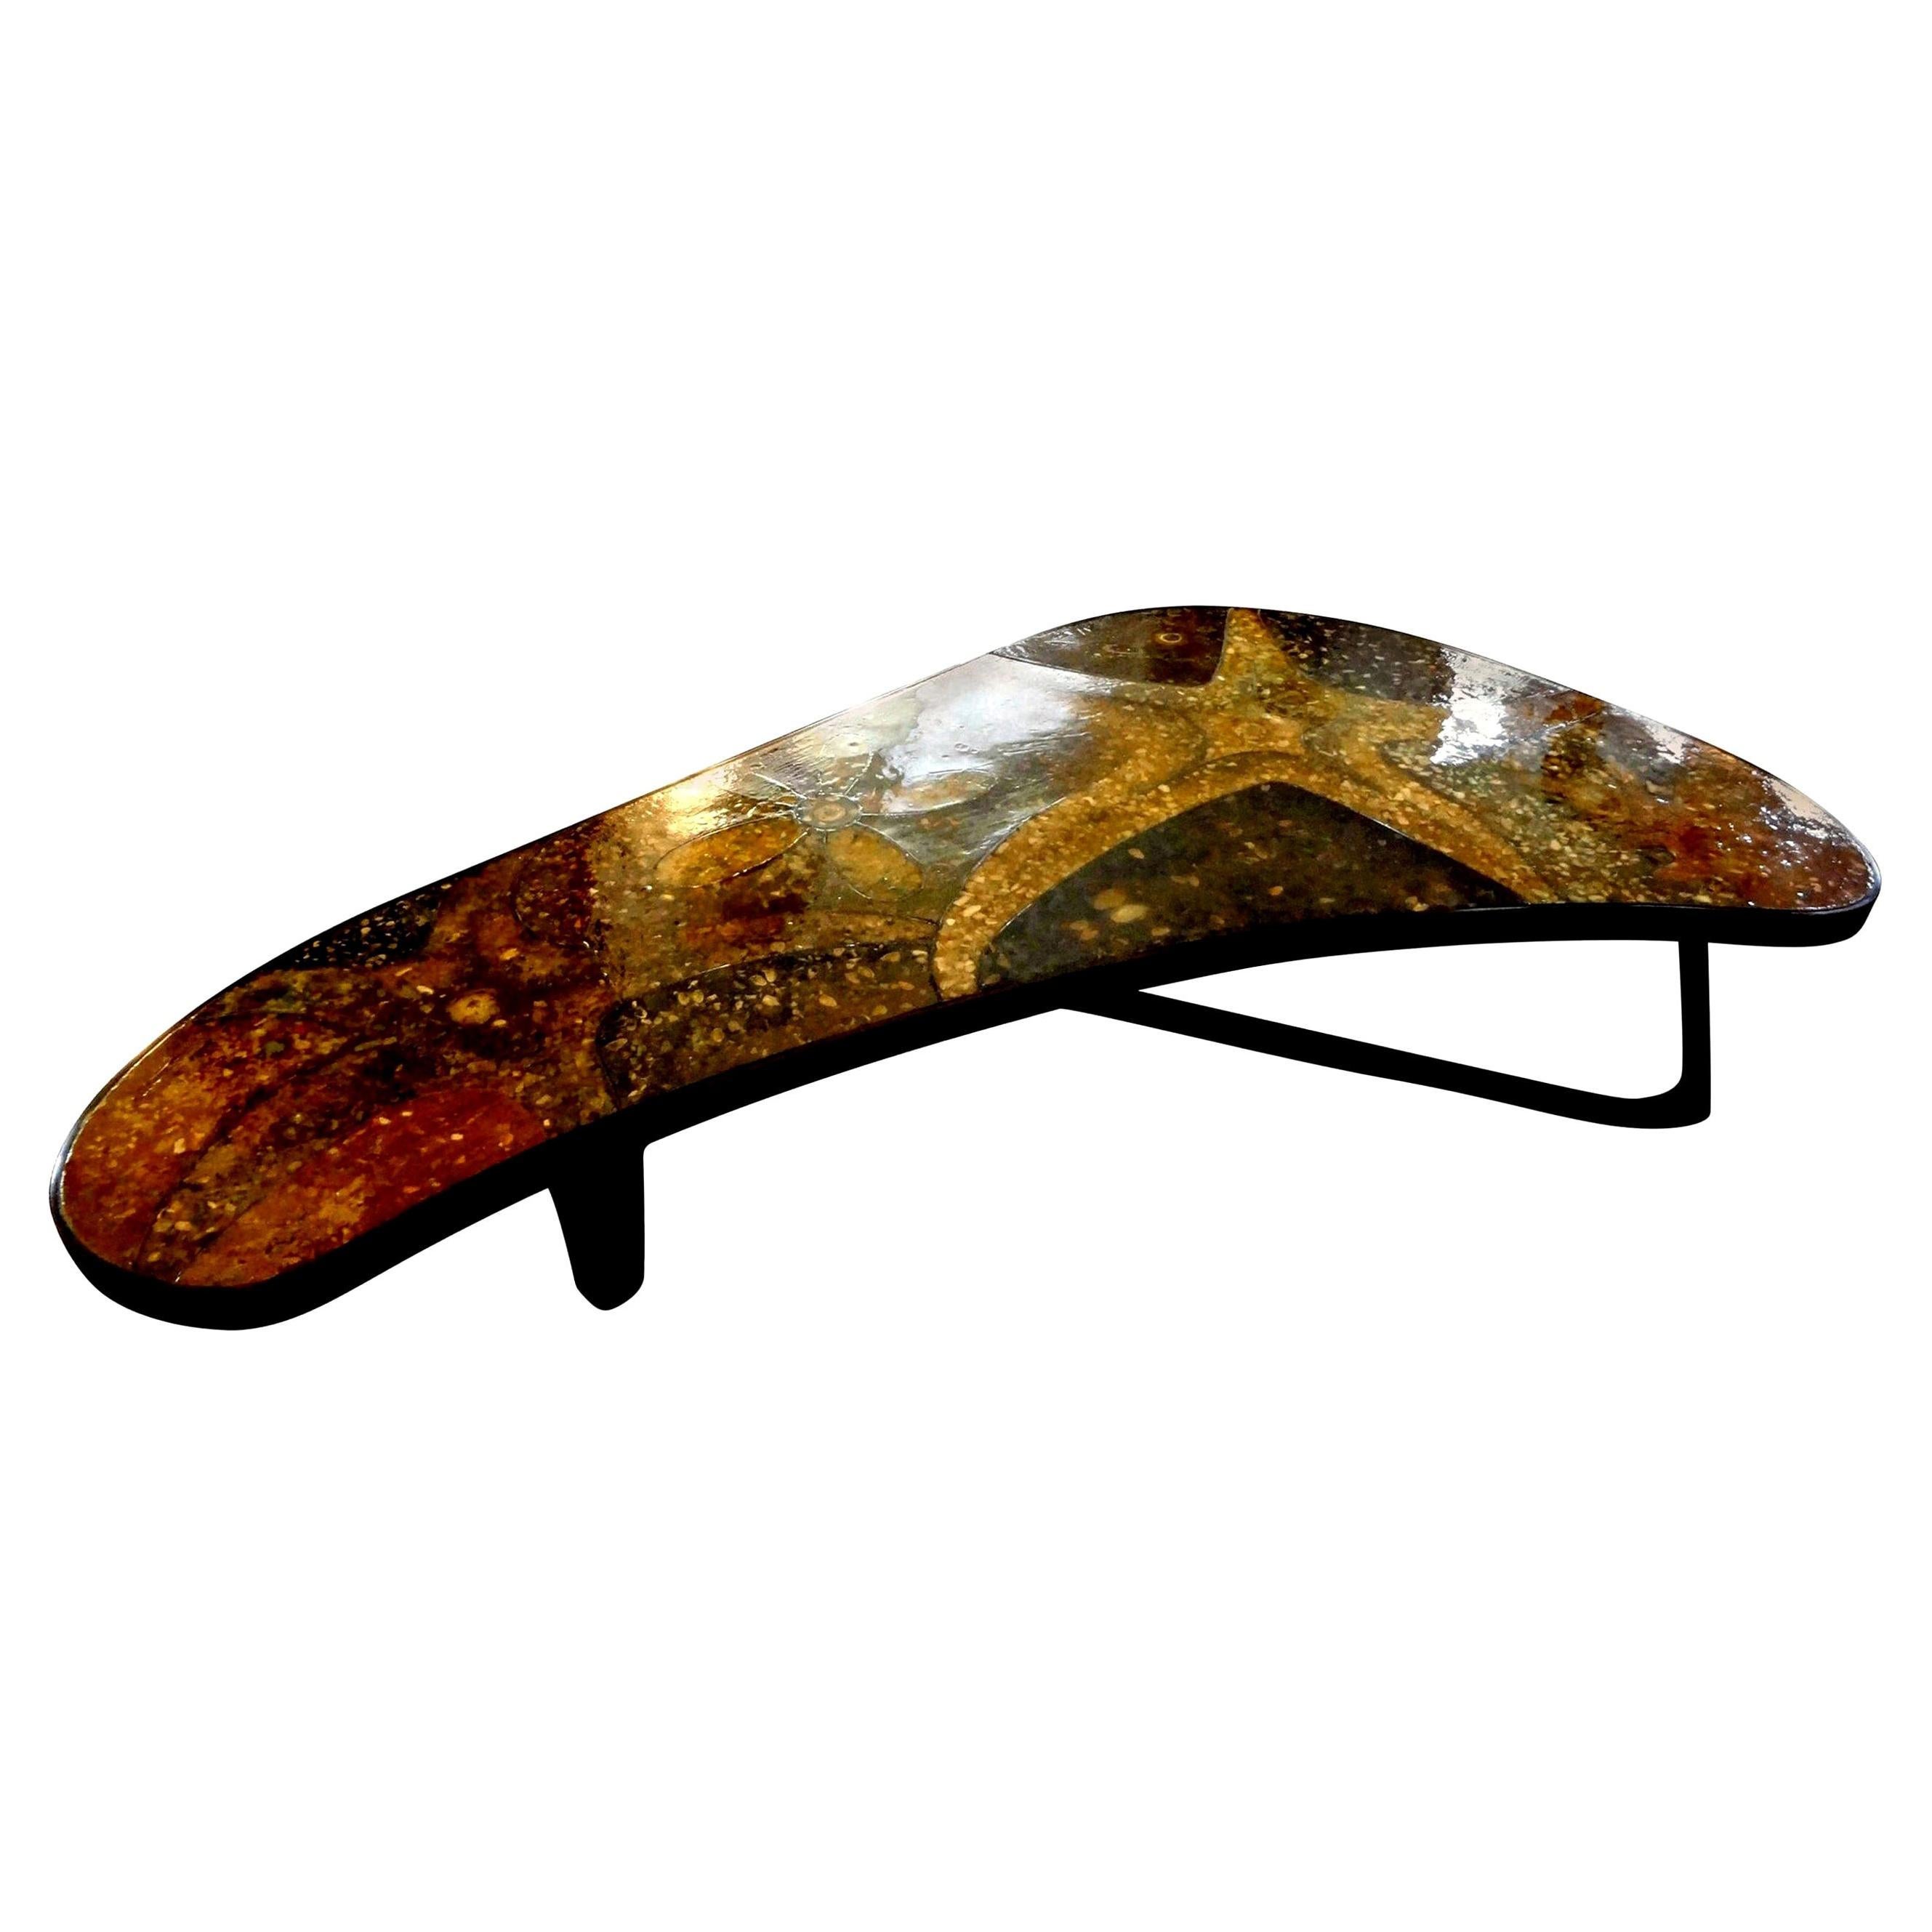 Mid-Century Modern bronze resin and shell cocktail table.
Outstanding custom Mid-Century Modern bronze cocktail table with a resin, shell and stone top. This most unusual large coffee table is boomerang shaped and is in very good condition. This